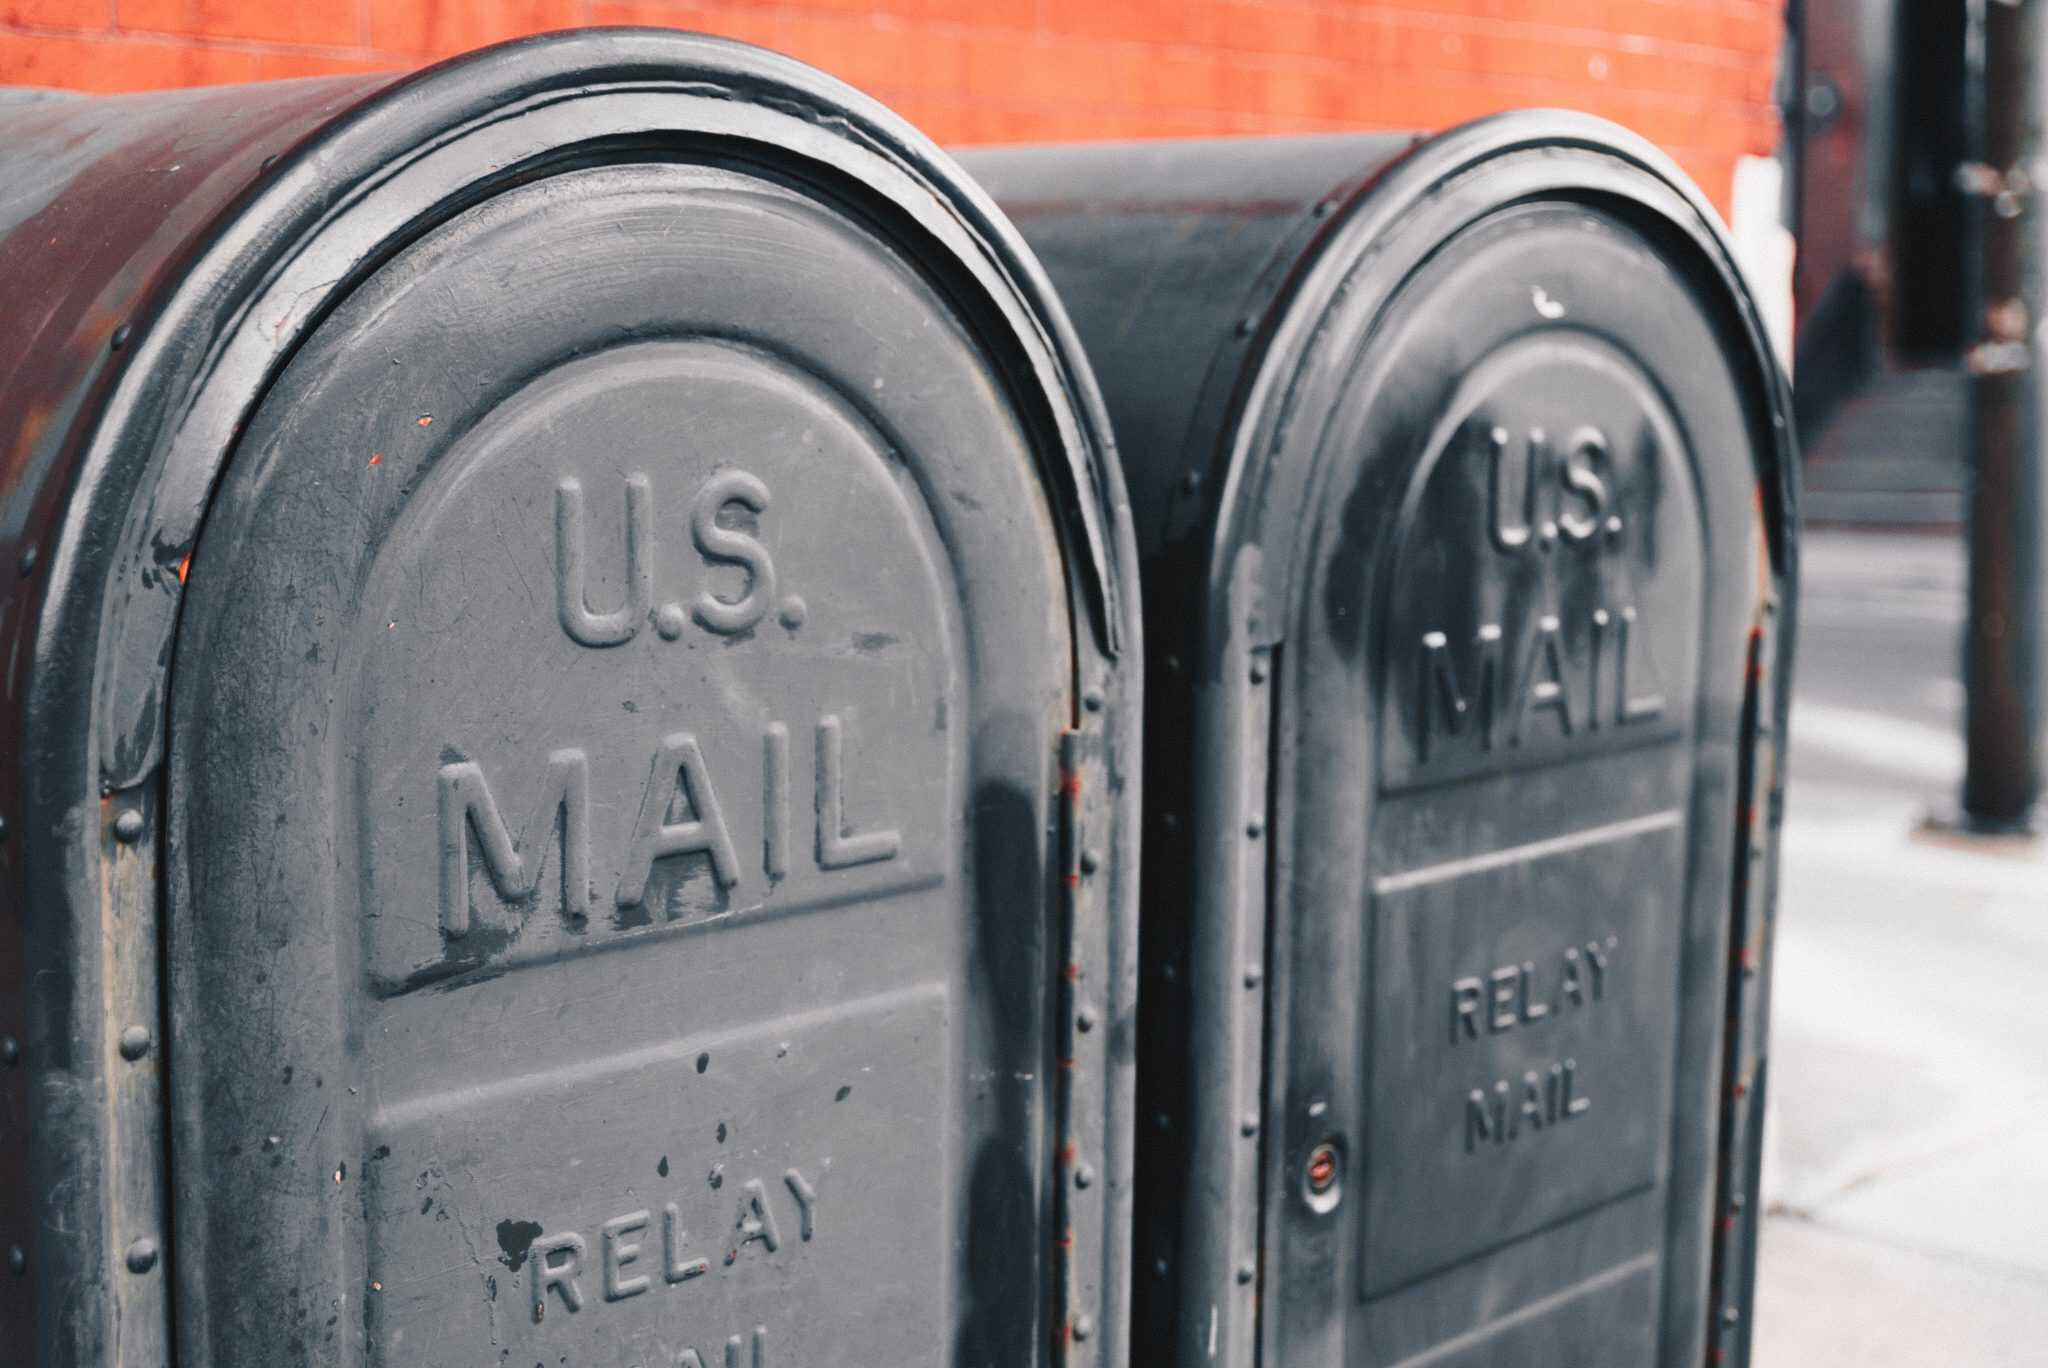 Two black curbside mailboxes side-by-side